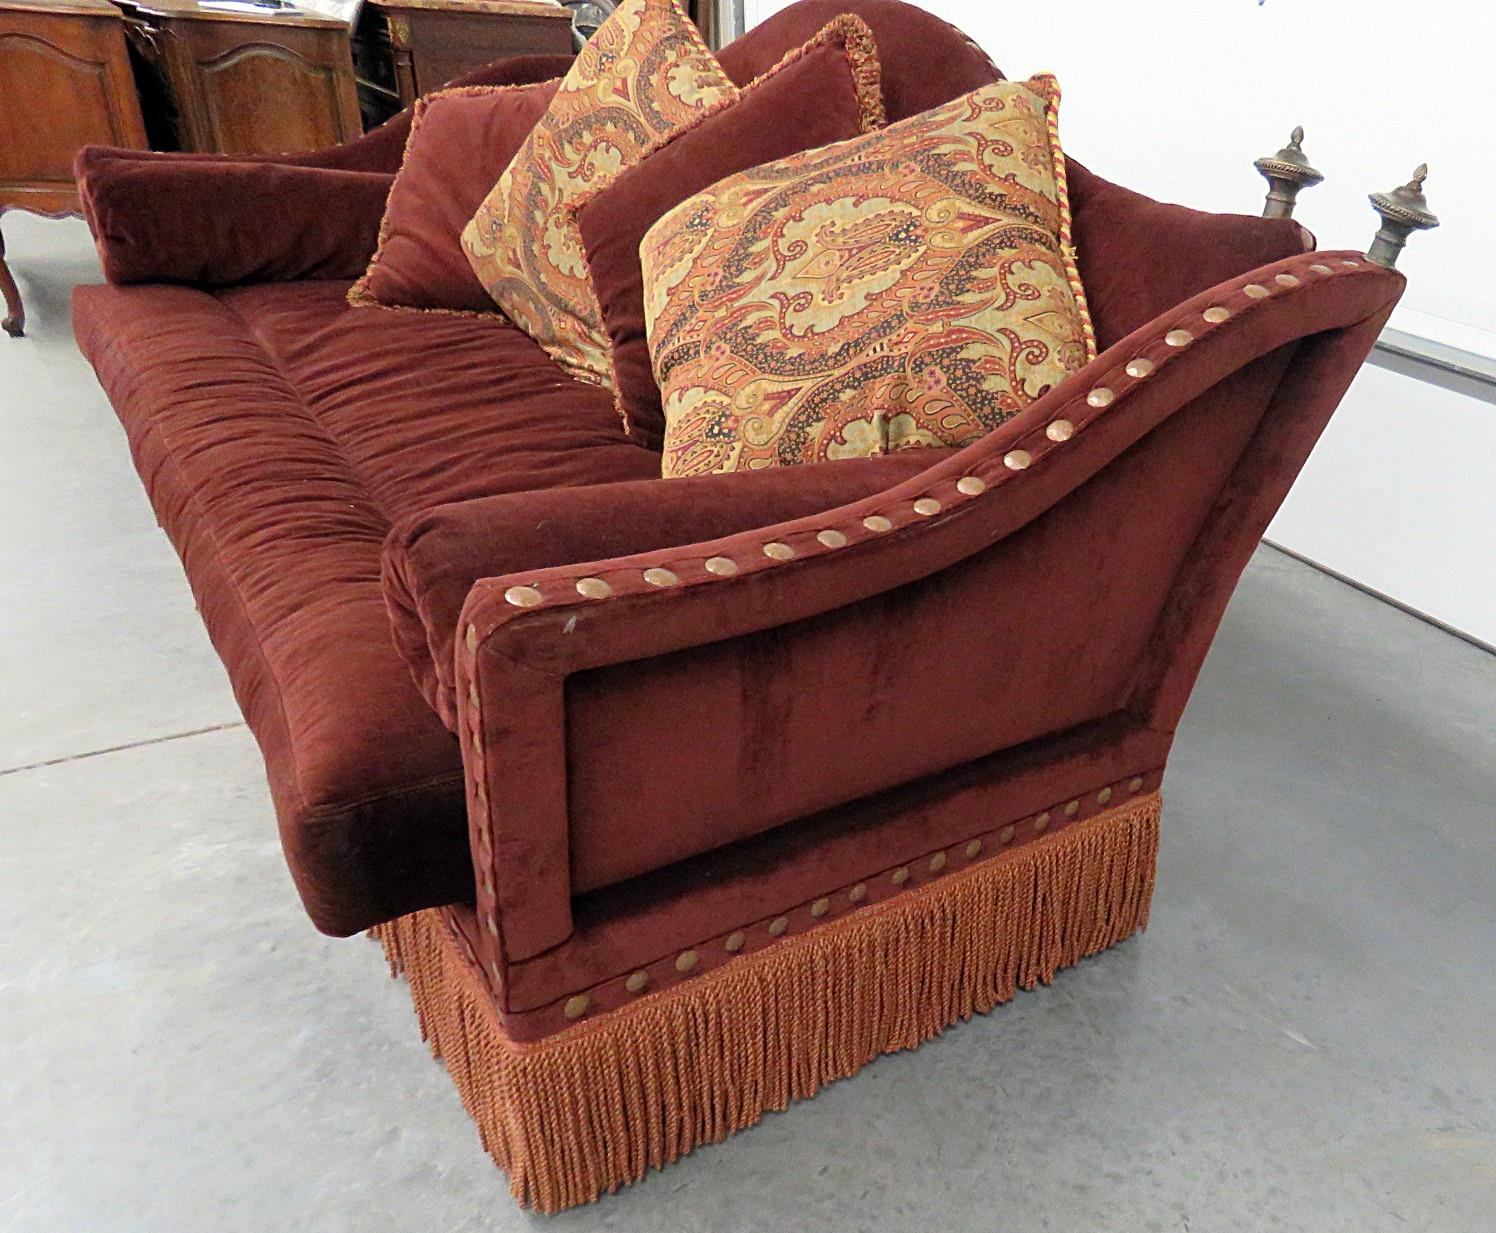 Ferguson Copeland Regency style sofa with nailhead trim and 5 accent pillows.